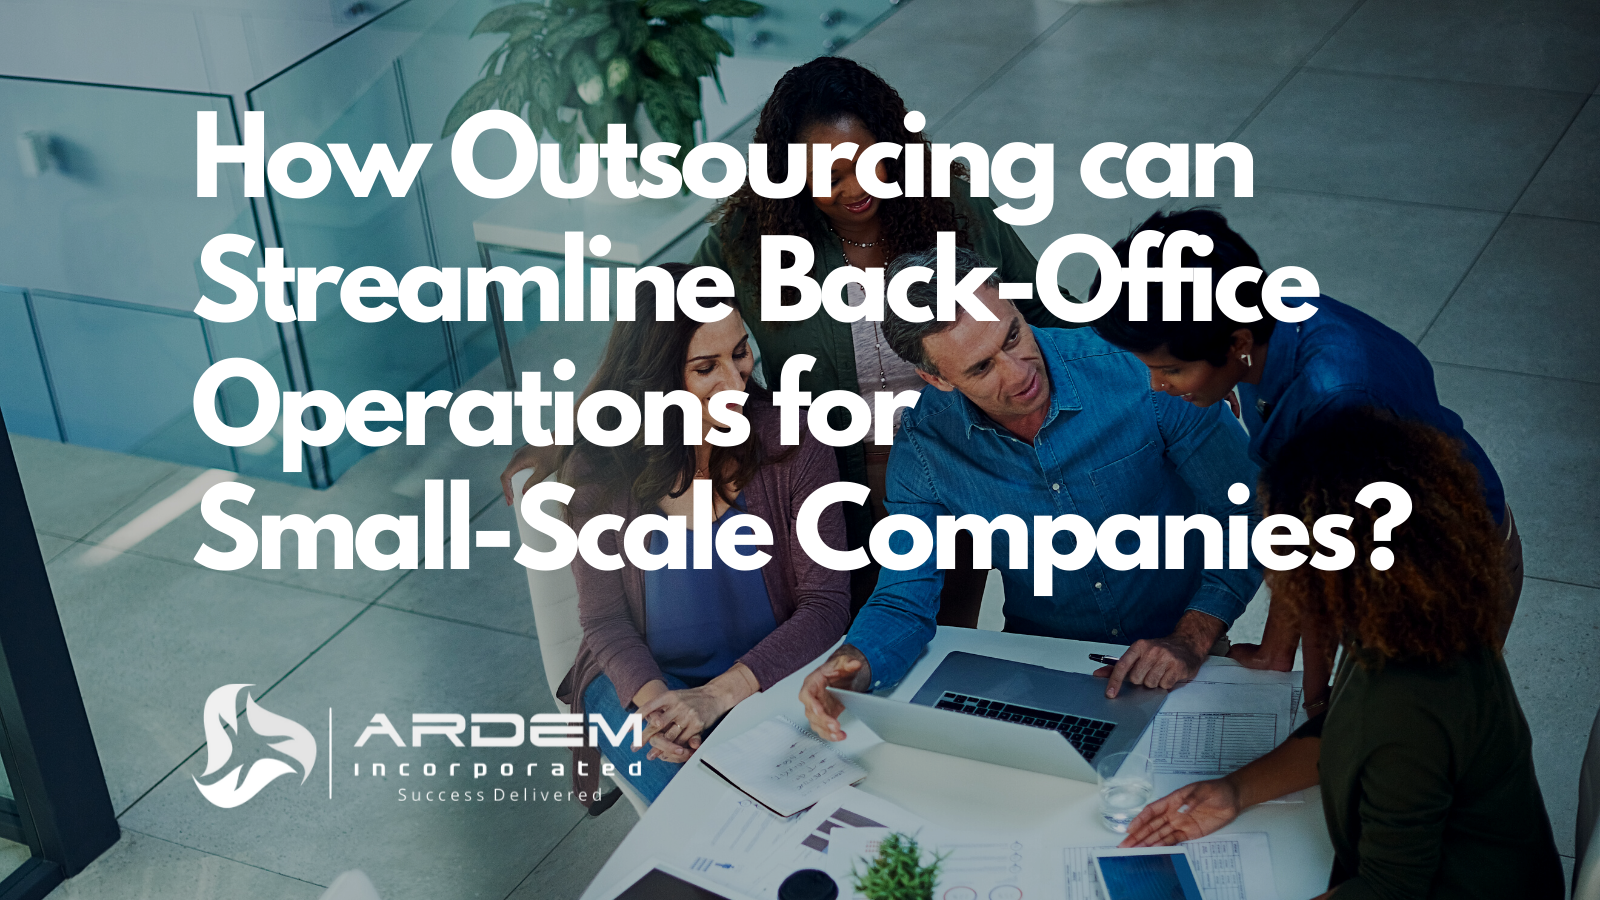 Back-Office Operations Outsourcing for Small Companies Blog